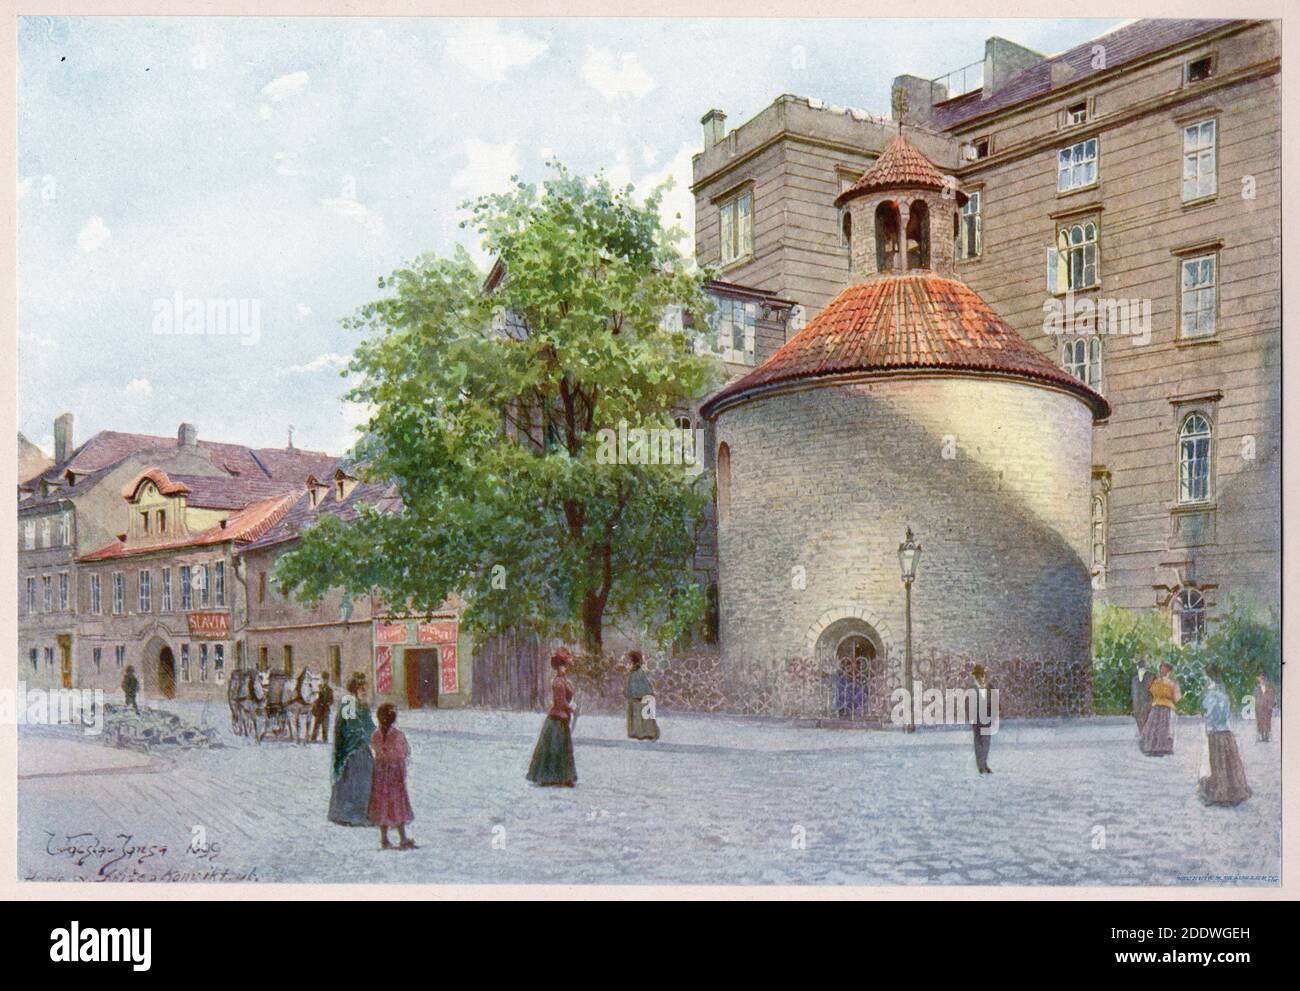 Romanesque rotunda of the Finding of the Holy Cross (Rotunda Nalezení svatého Kříže) on the corner of Konviktská Street in Staré Město (Old Town) in Prague depicted in the watercolour painting by Czech painter Václav Jansa (1899) from his cycle Old Prague (Stará Praha) ordered by the Prague Magistrate and published in the beginning of the 20th century by Czech publisher Bedřich Kočí. Stock Photo